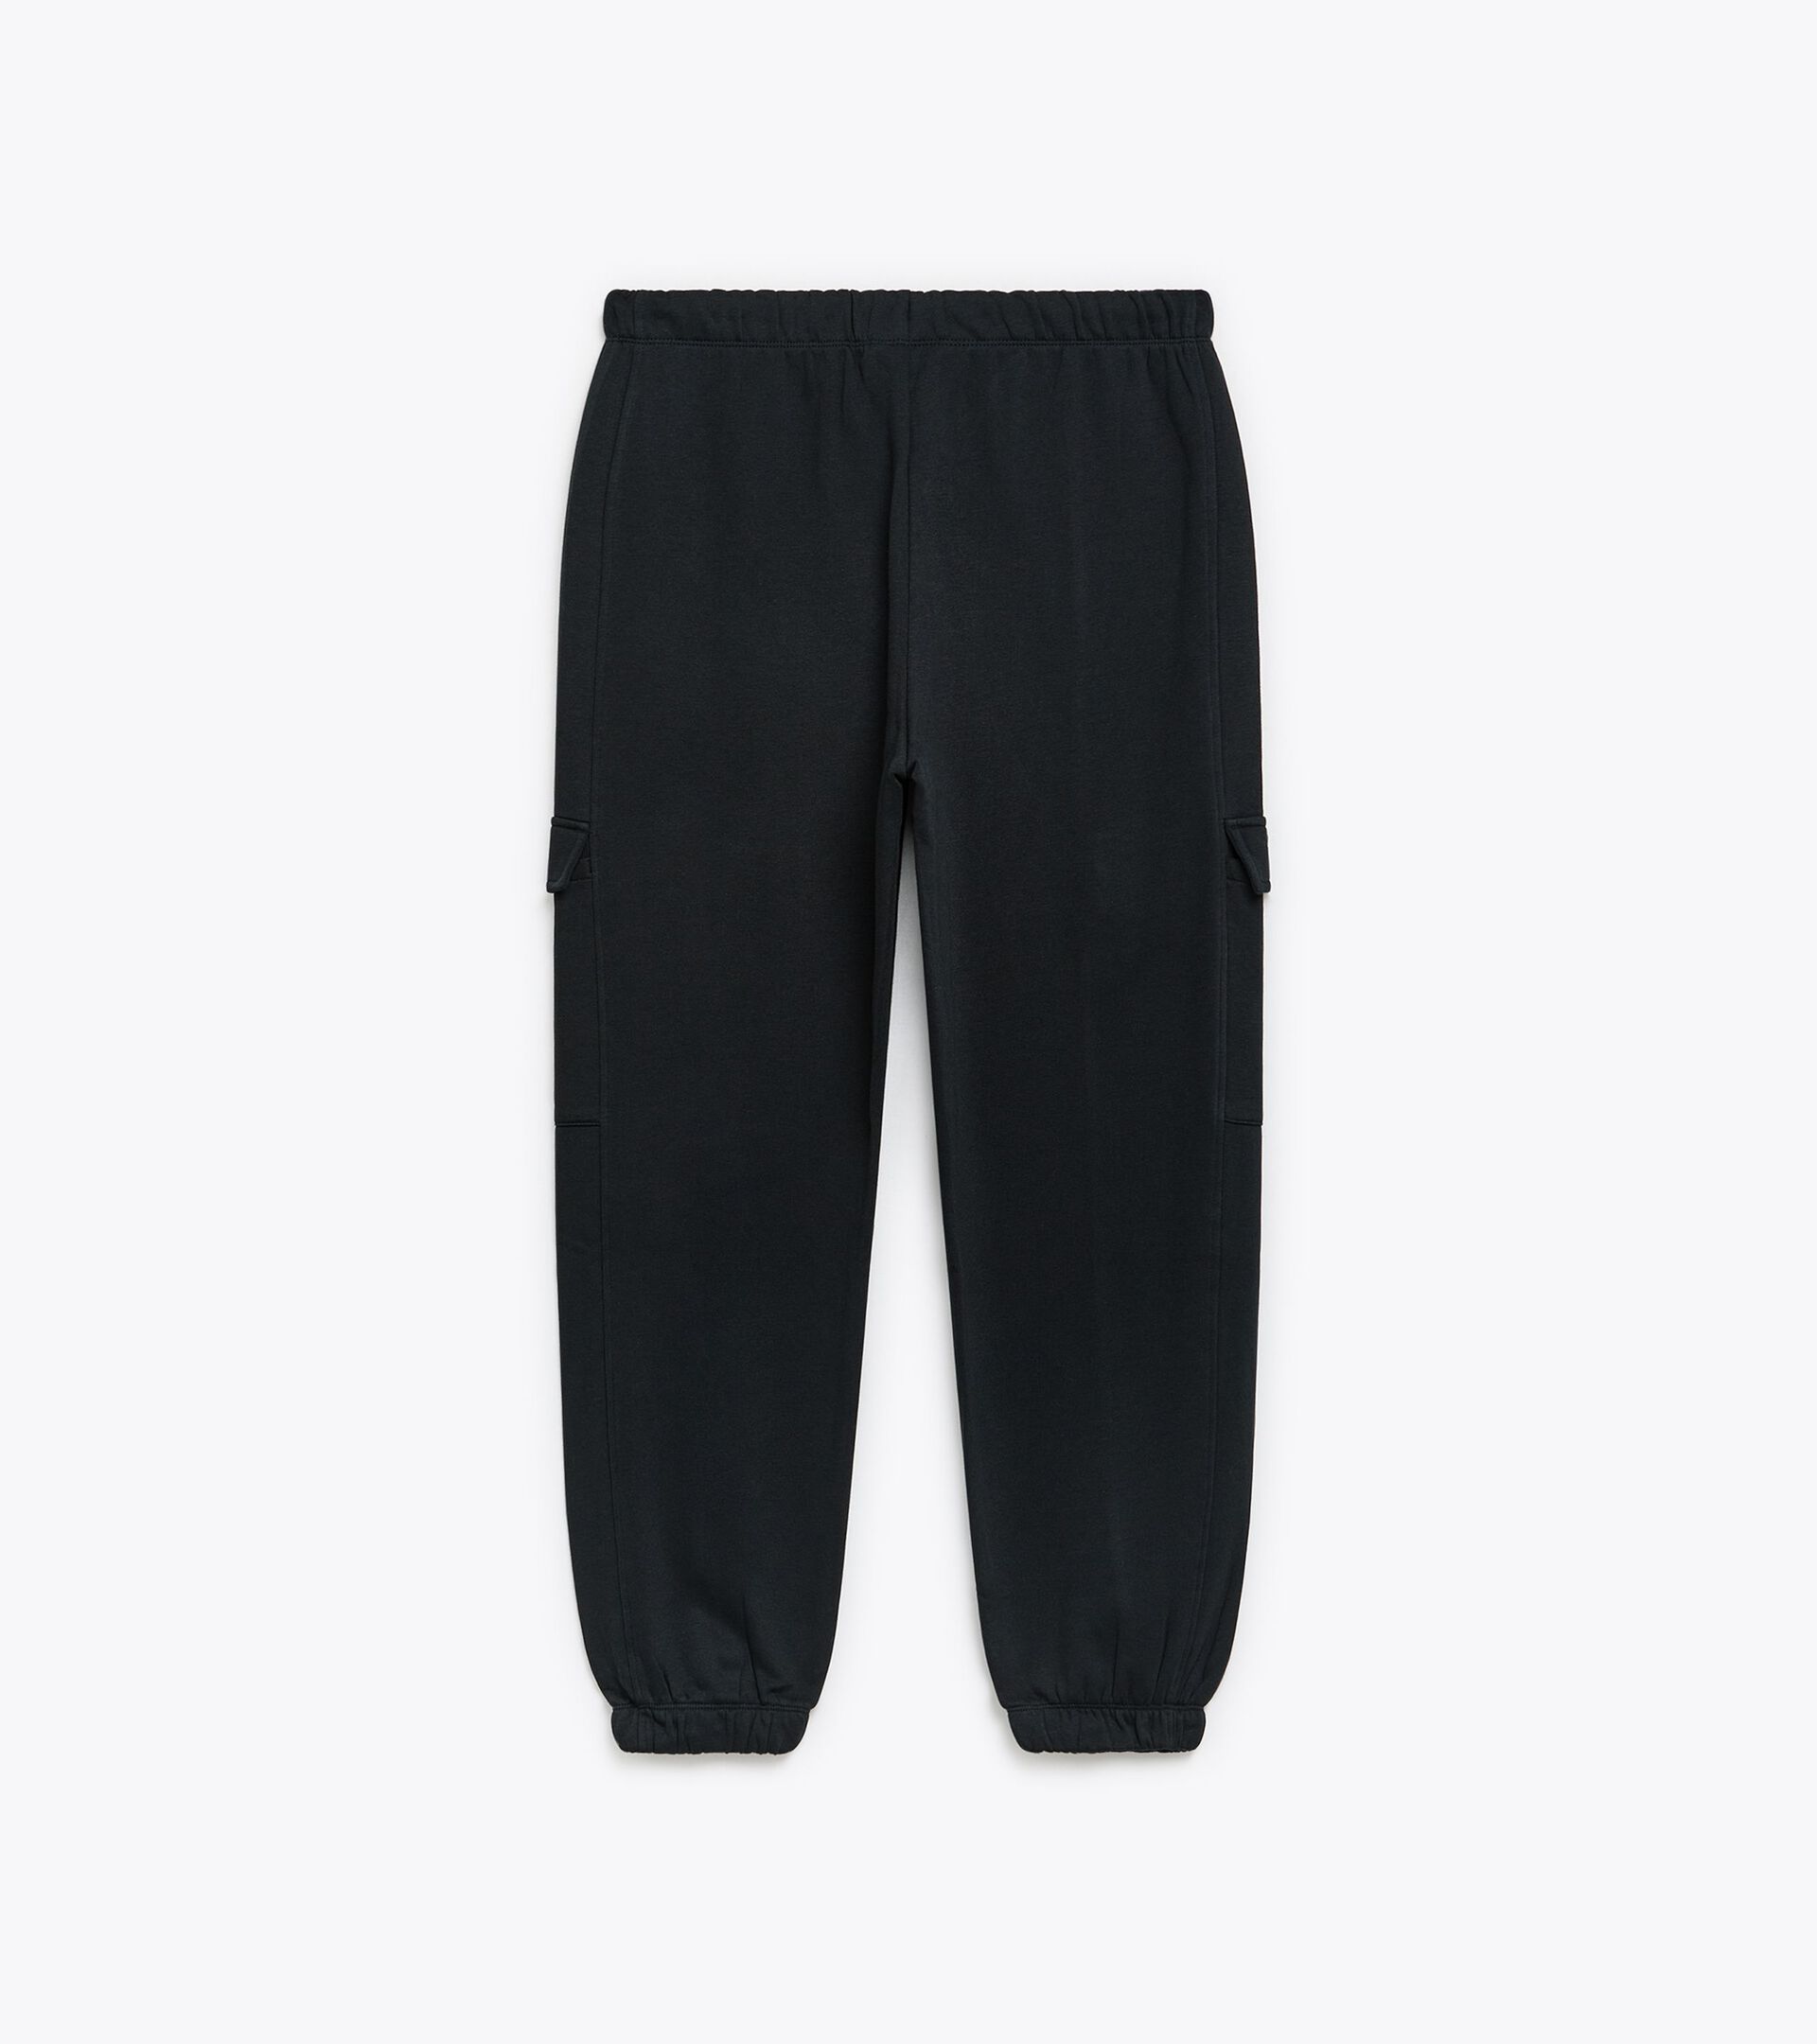 I LUV GUAP Flared Sweatpants (ORDER 1 SIZE UP 4 BAGGIER FIT